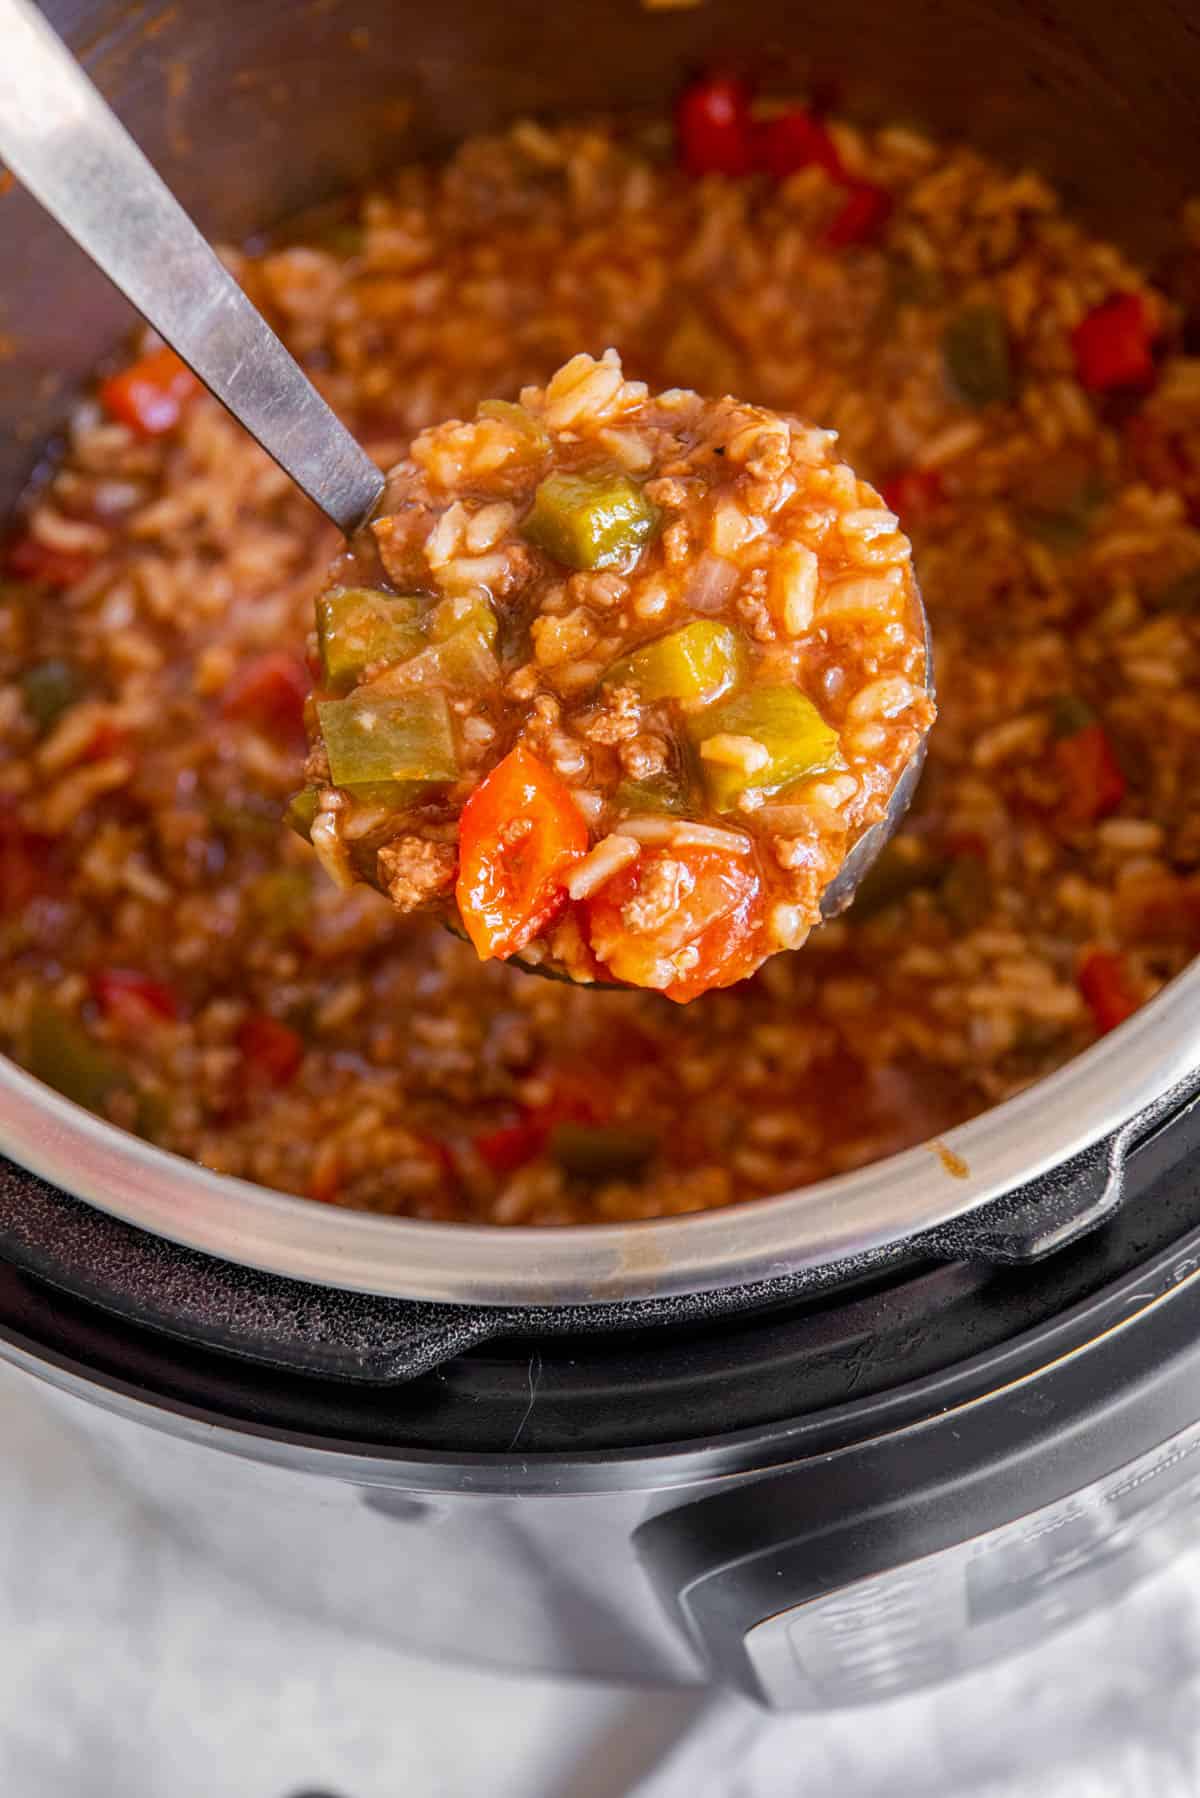 A soup ladle scooping out the stuffed pepper soup from the instant pot bowl.